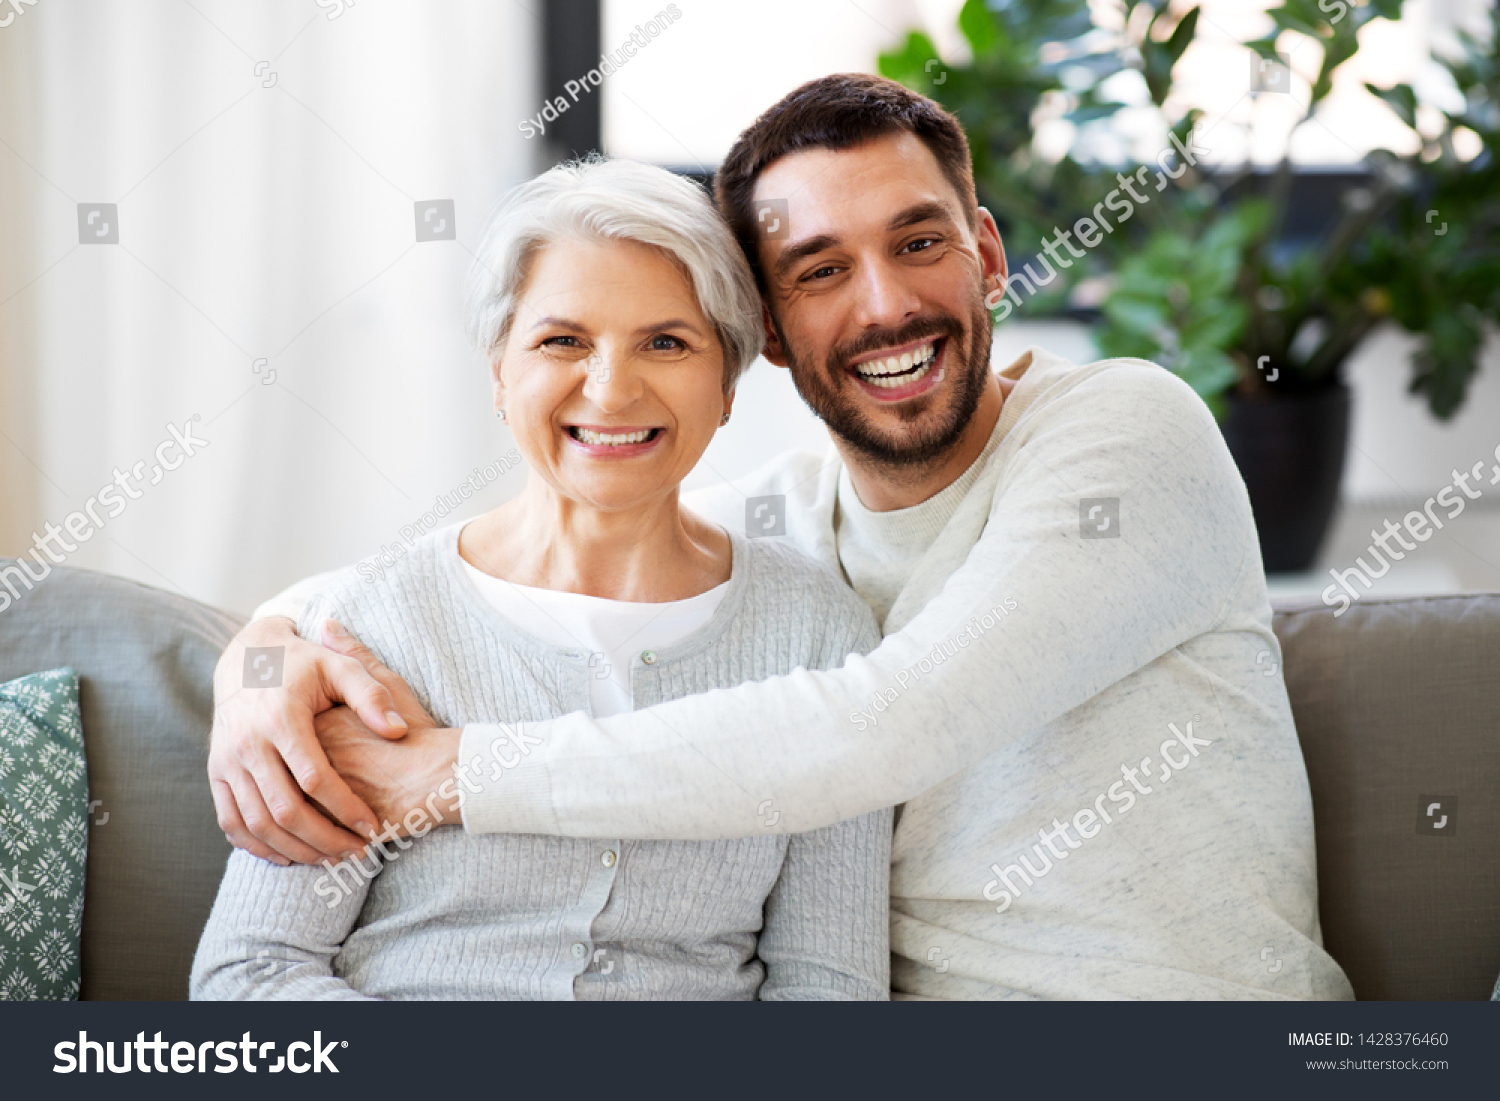 family, generation and people concept - happy smiling senior mother with adult son hugging at home #1428376460